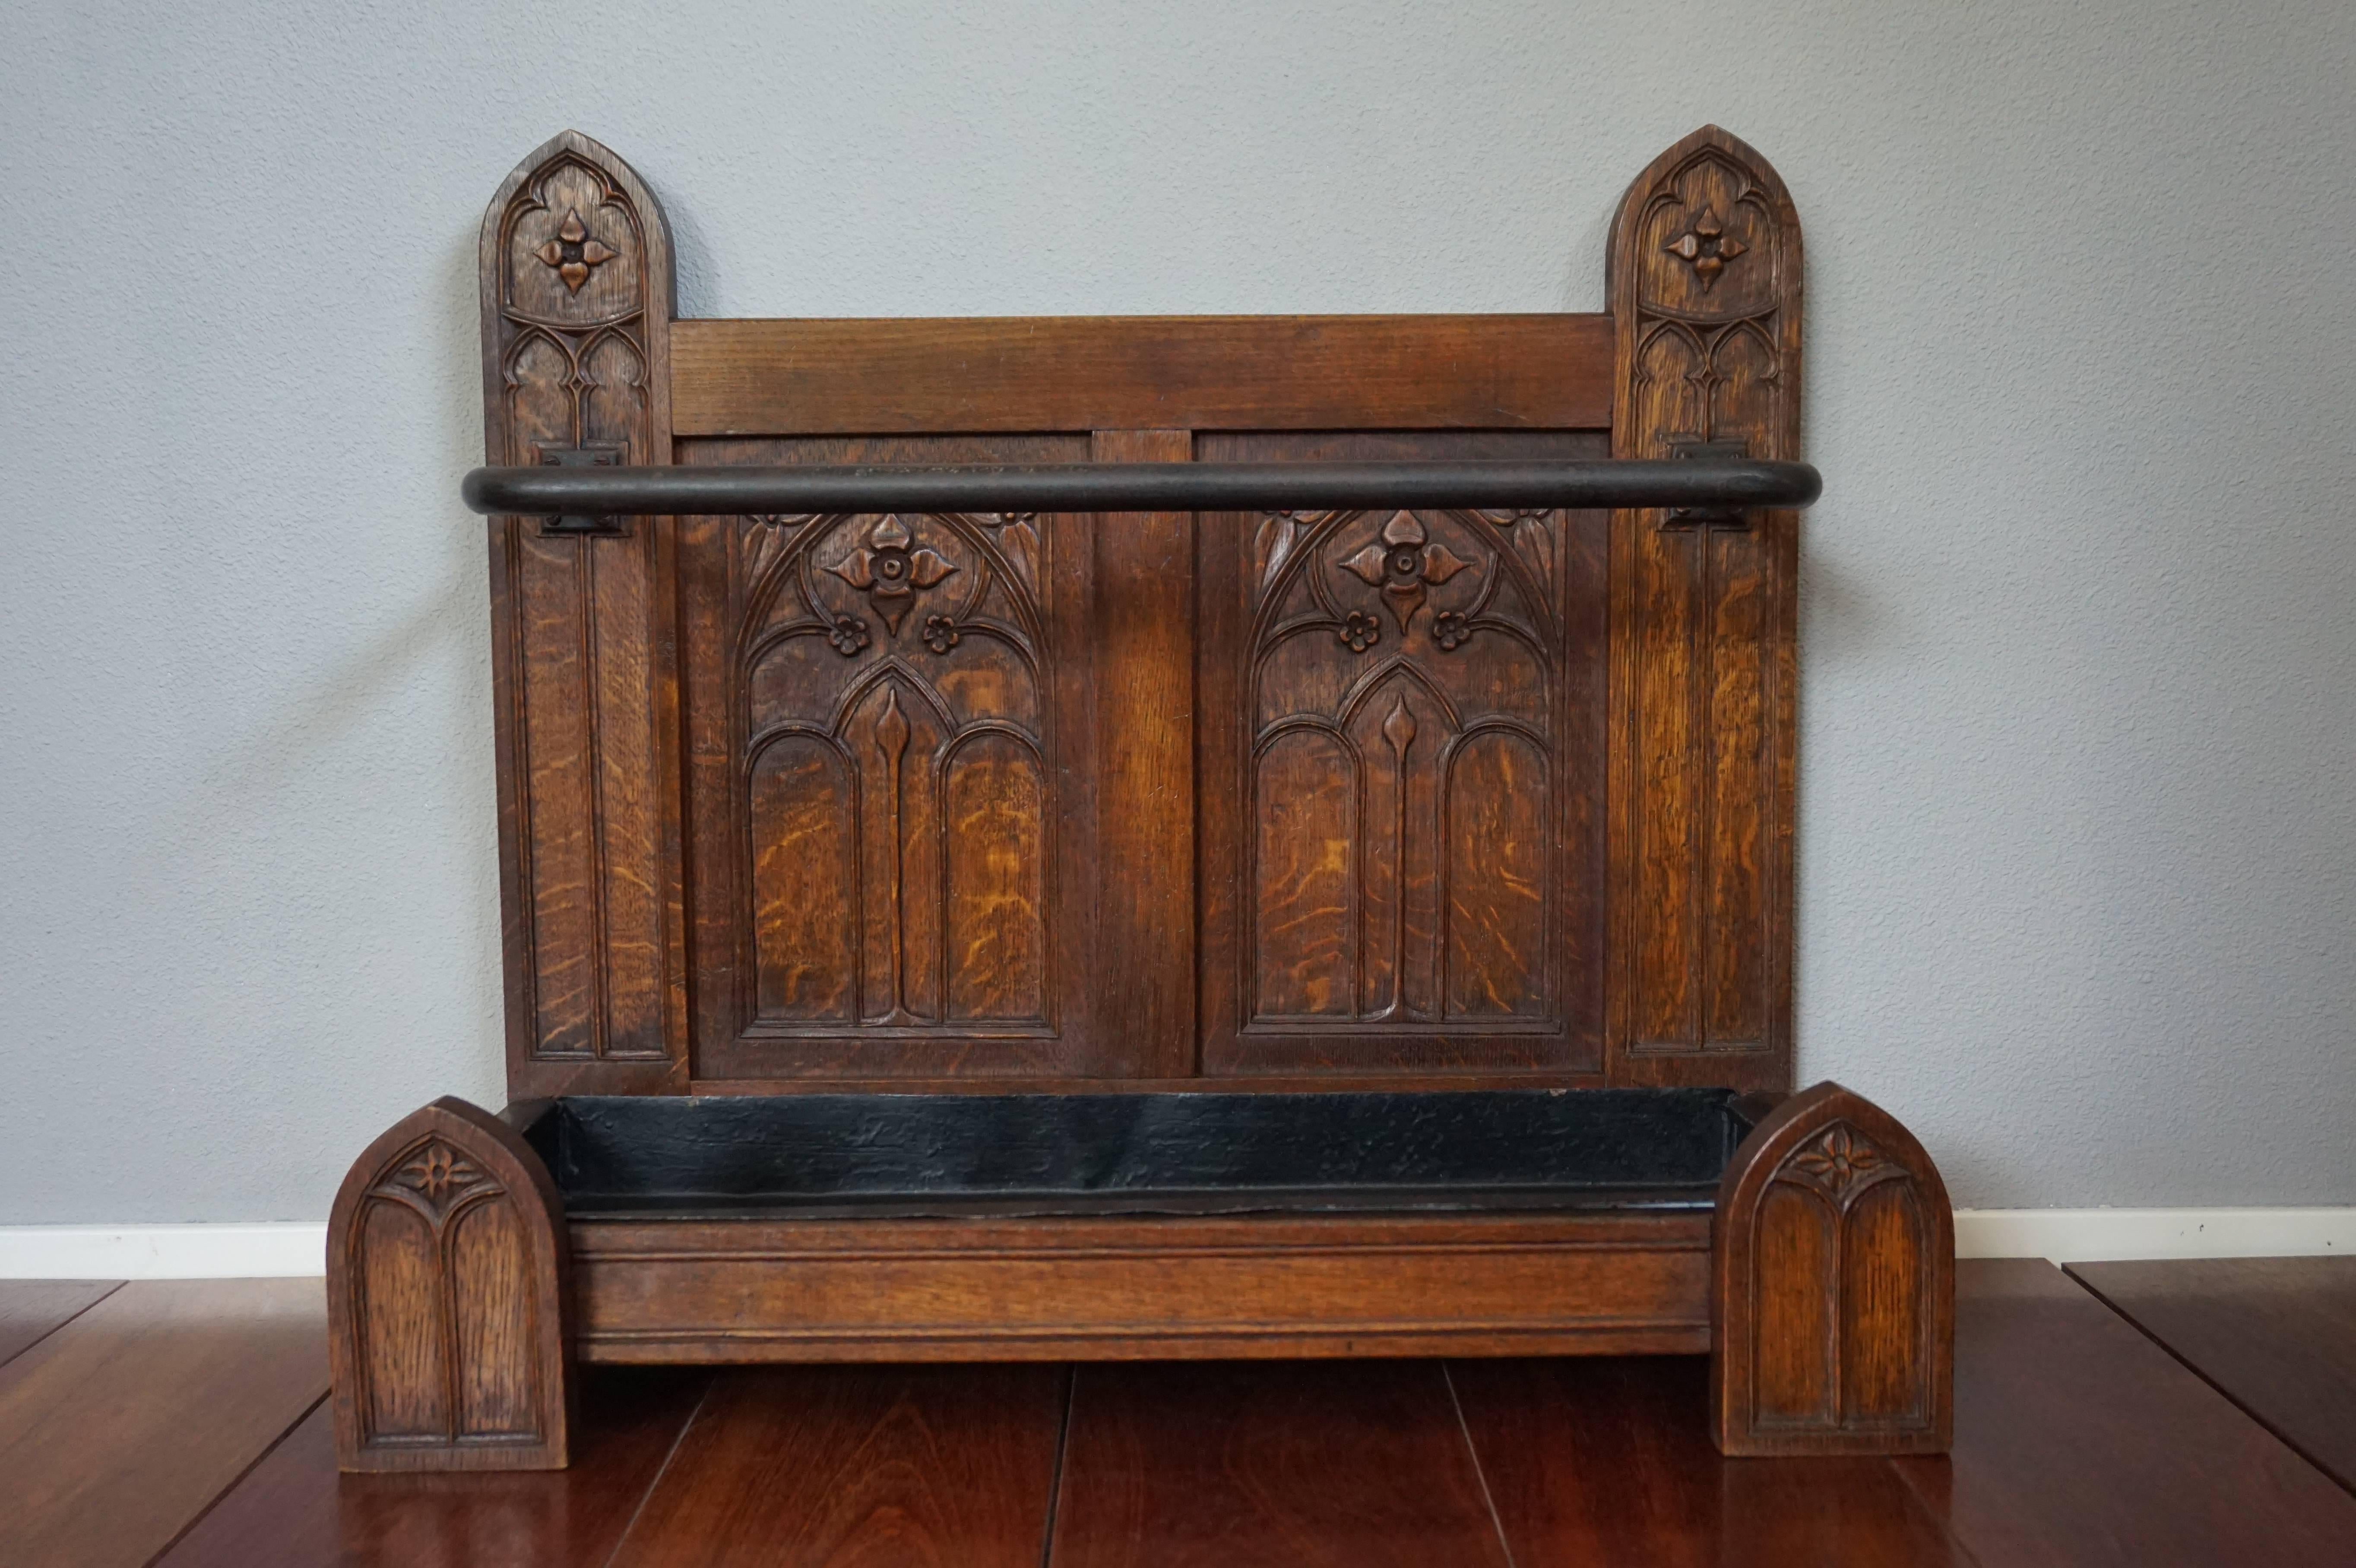 Wonderful Gothic eyecatcher to come home to.

If first impressions count then you cannot go wrong with this Gothic Revival Stand in your entrance. Not only is it rare and beautifully designed, it is also perfectly carved and in near mint condition.